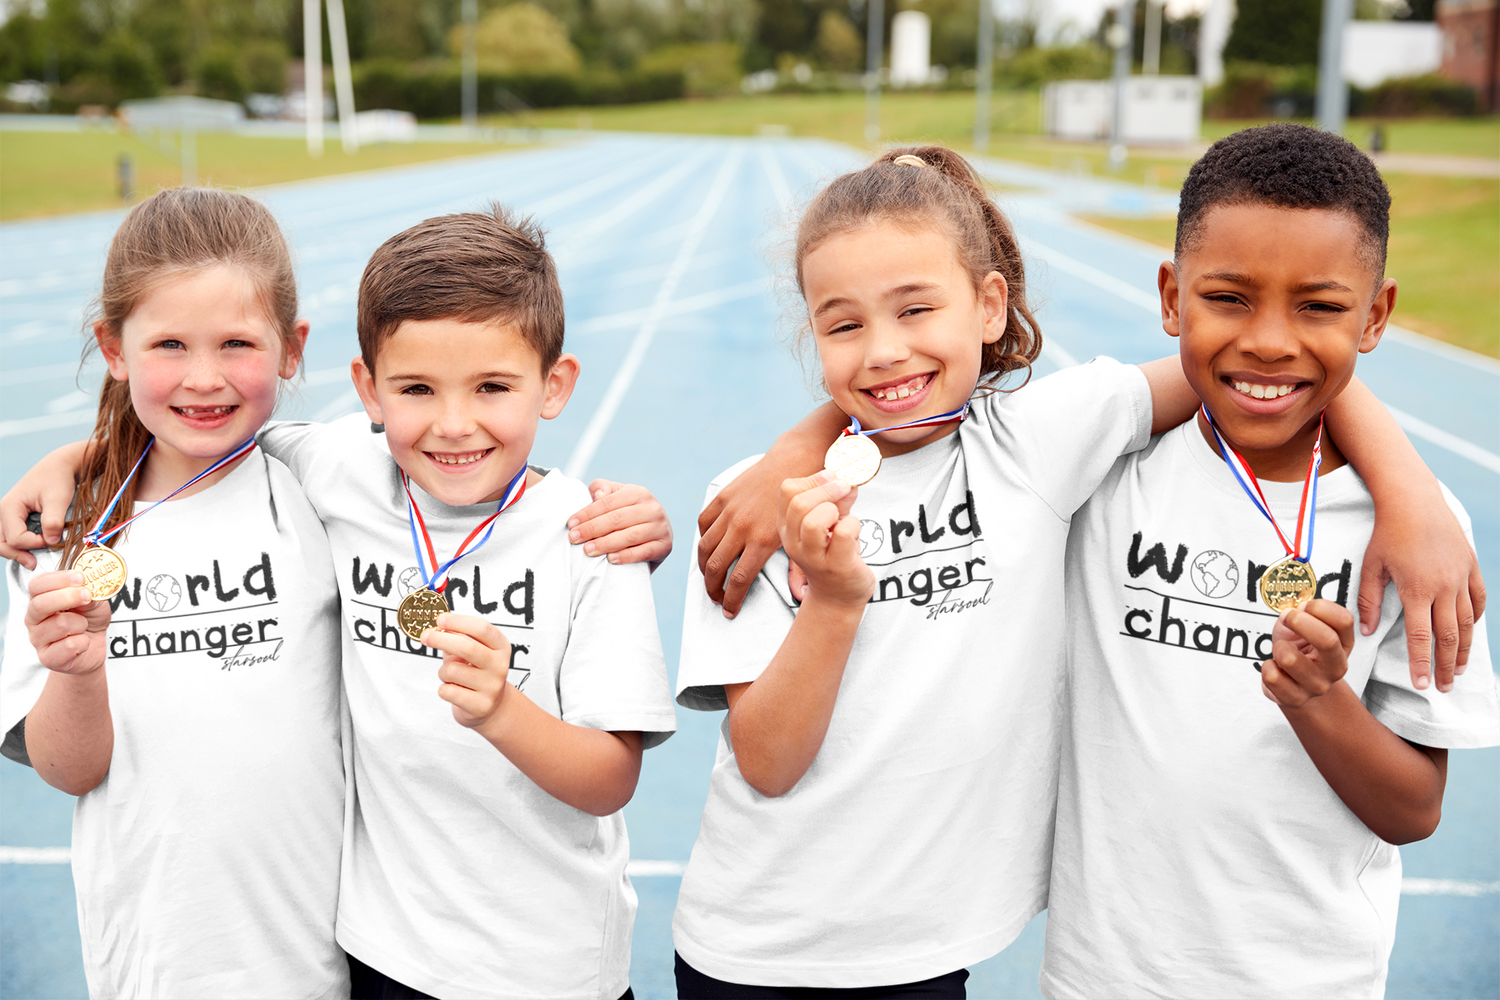 A group of kids wearing white t-shirts that say 'world changer' all proceeds are donated to charity